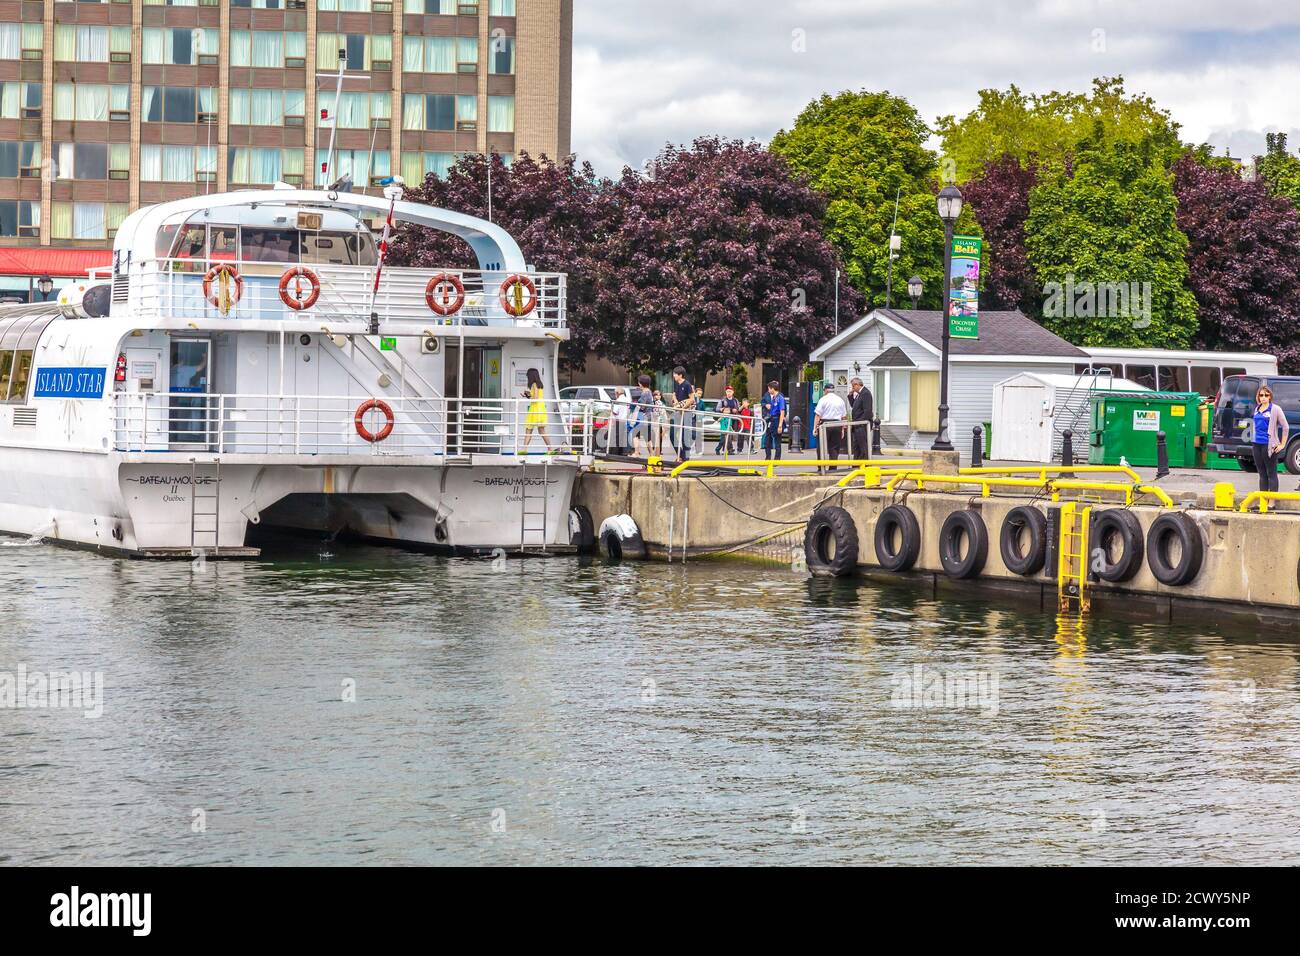 Kingston waterfront, Ontario, Canada, August 2014 - Passengers line up to board a cruise boat docked by the quayside Stock Photo